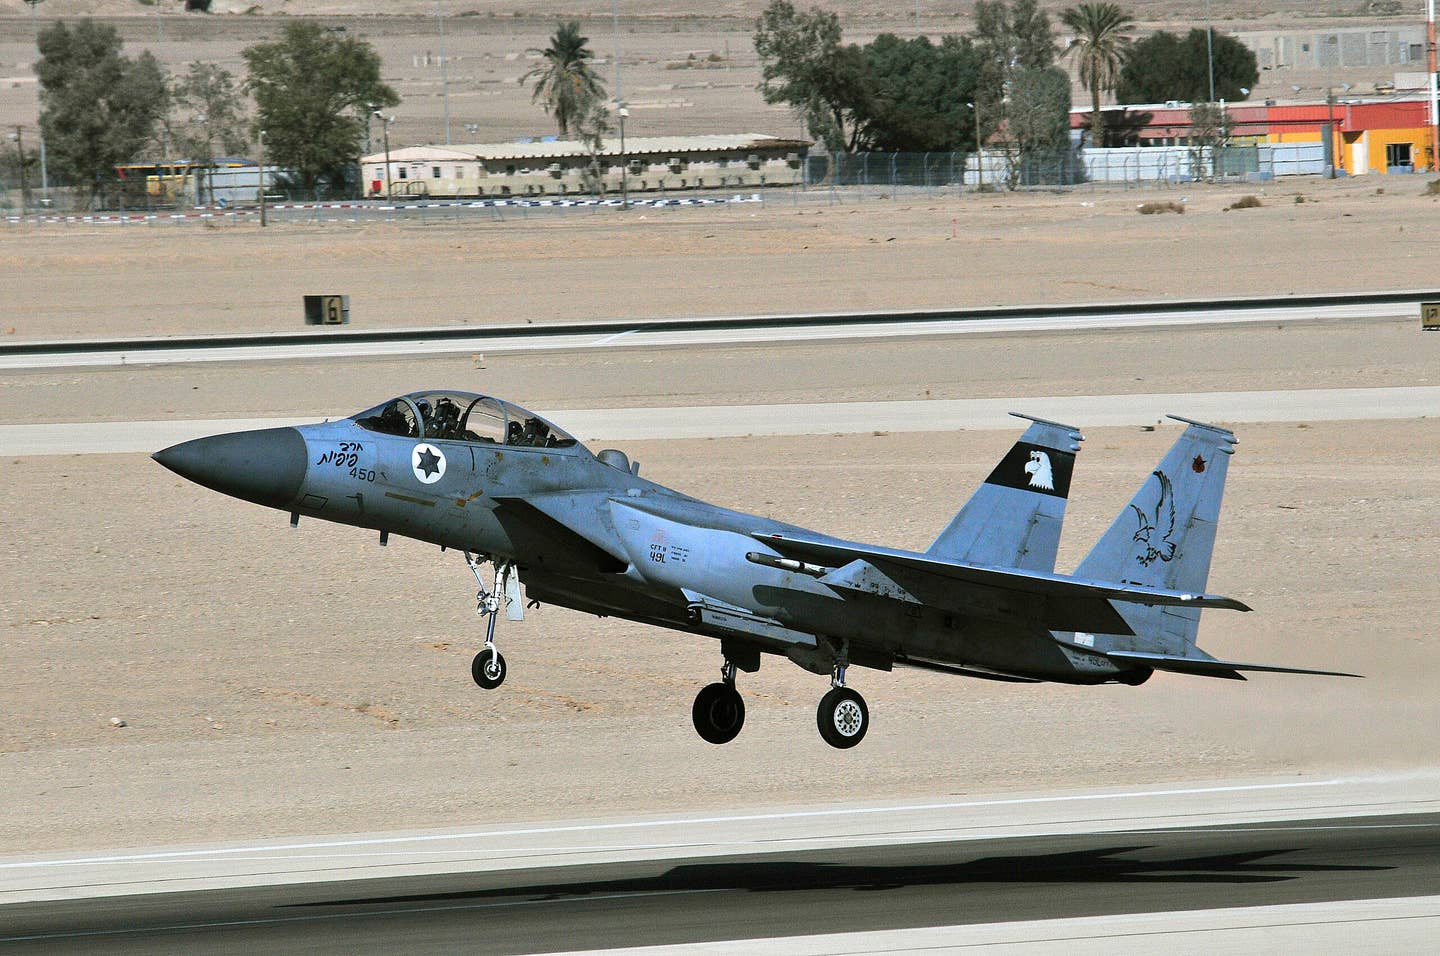 An Israeli Air Force F-15D taking off. Note its conformal fuel tanks and large satcom installation behind its canopy. <em>U.S. Air Force photo by Master Sgt. Lee Osberry/Released</em>